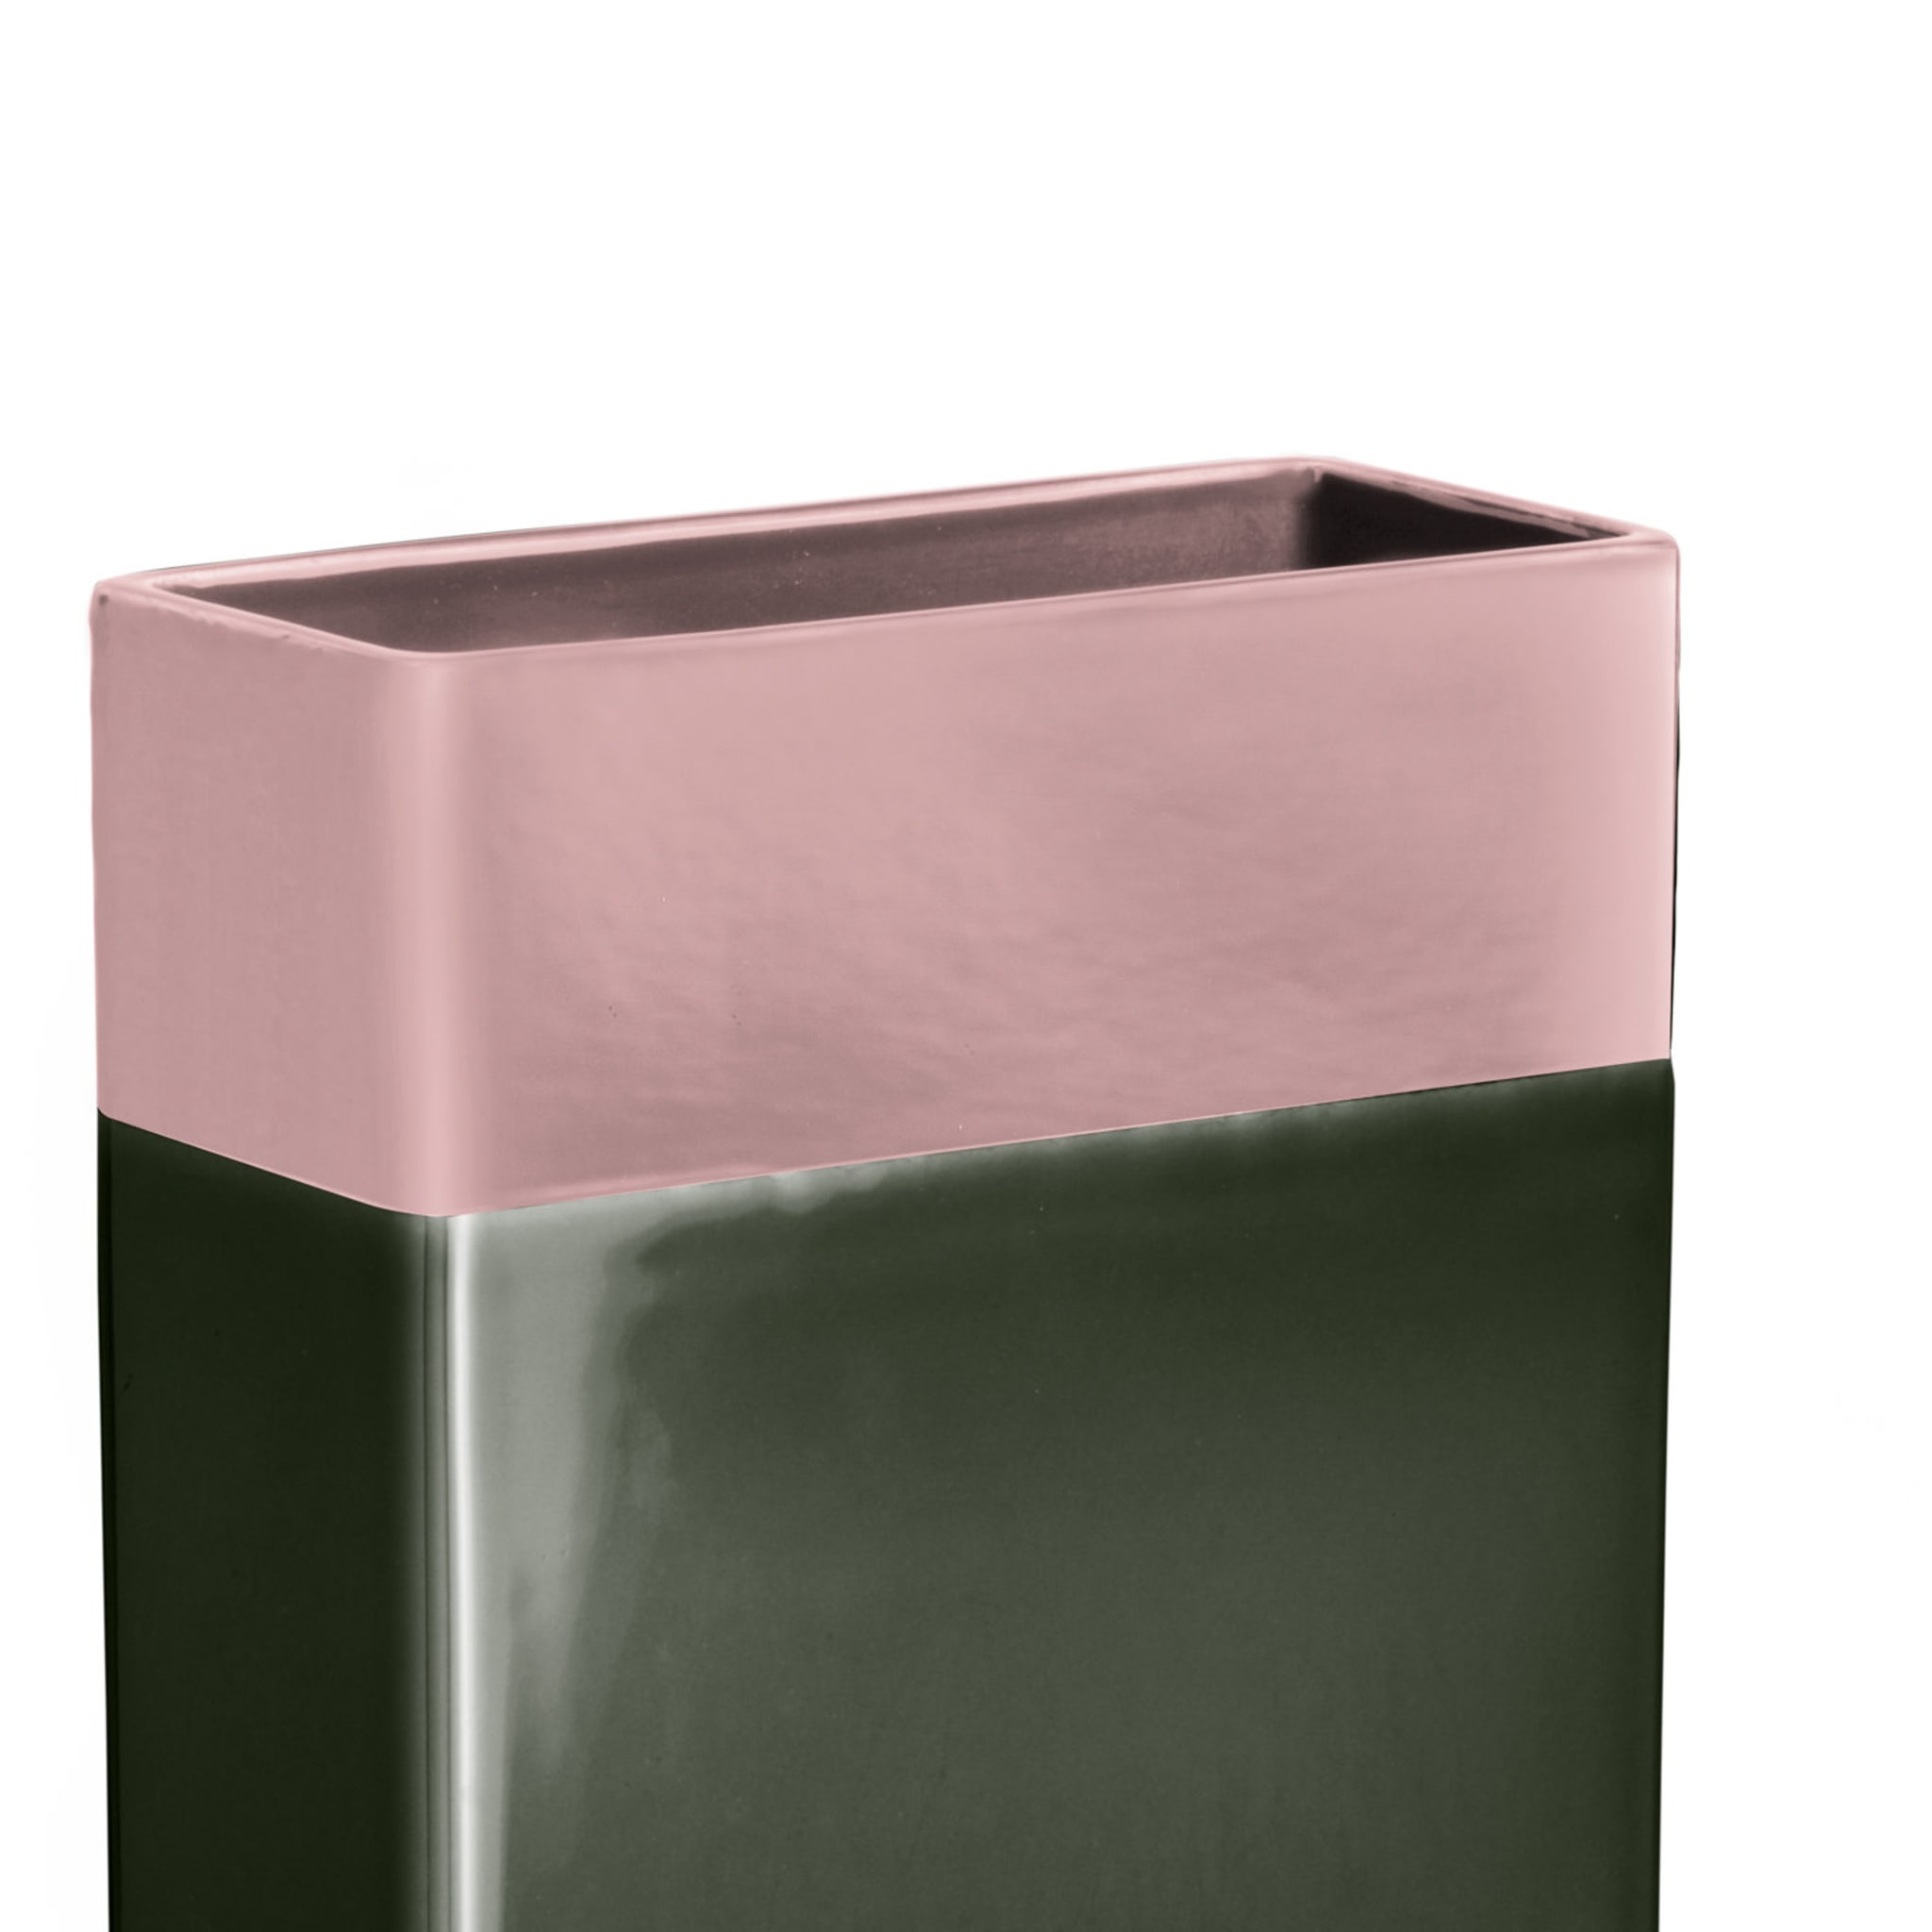 Tall Pink and Green Vase by Dimorestudio - Alternative view 1